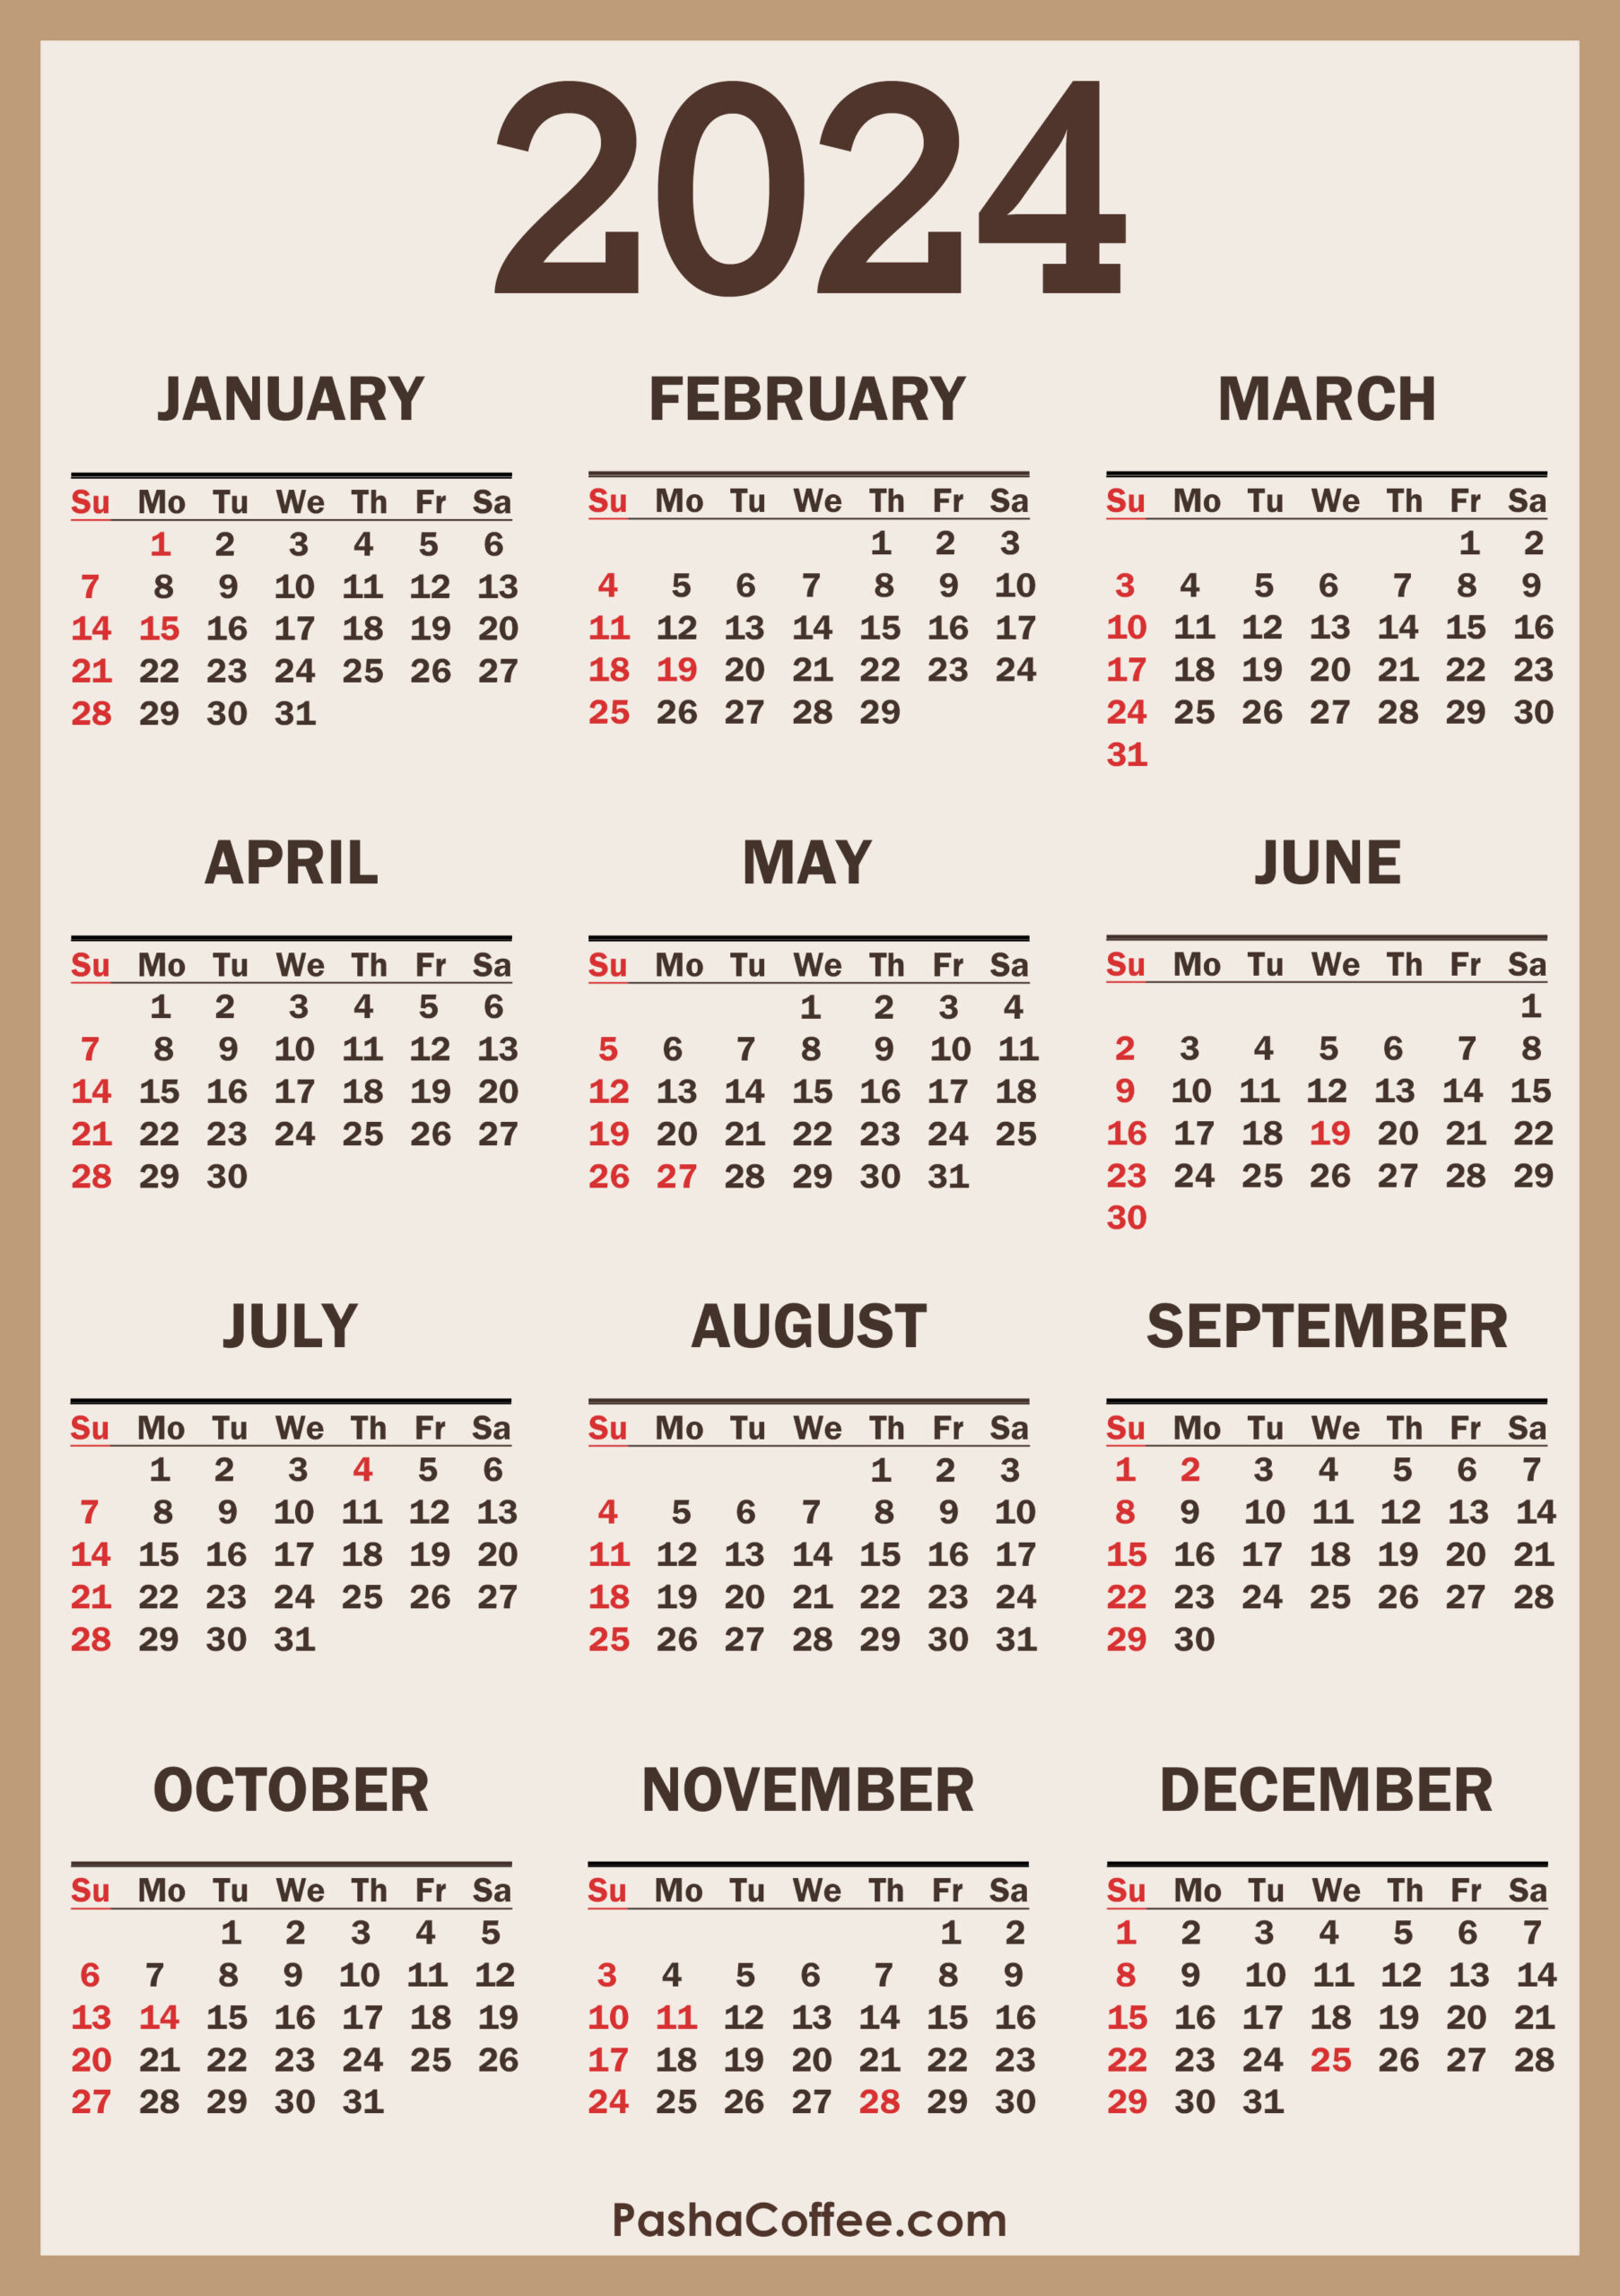 2024 Calendar With Holidays, Printable Free, Vertical | 2024 Calendar With Holidays Printable Free